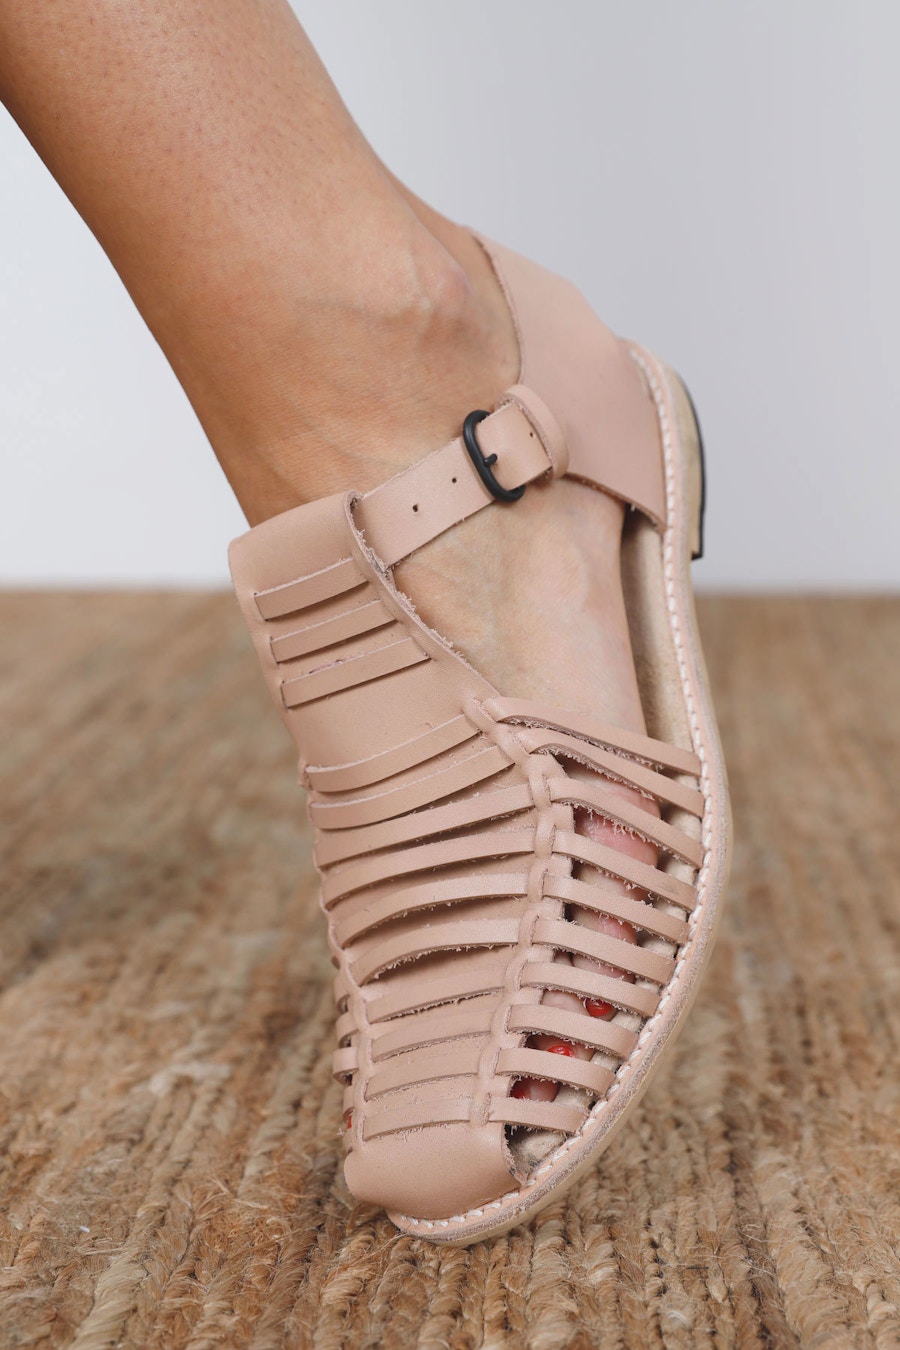 Edit buckle Astrid Sandal The Shoe Camaraderie Leather By The Fabric Store Cass Pant